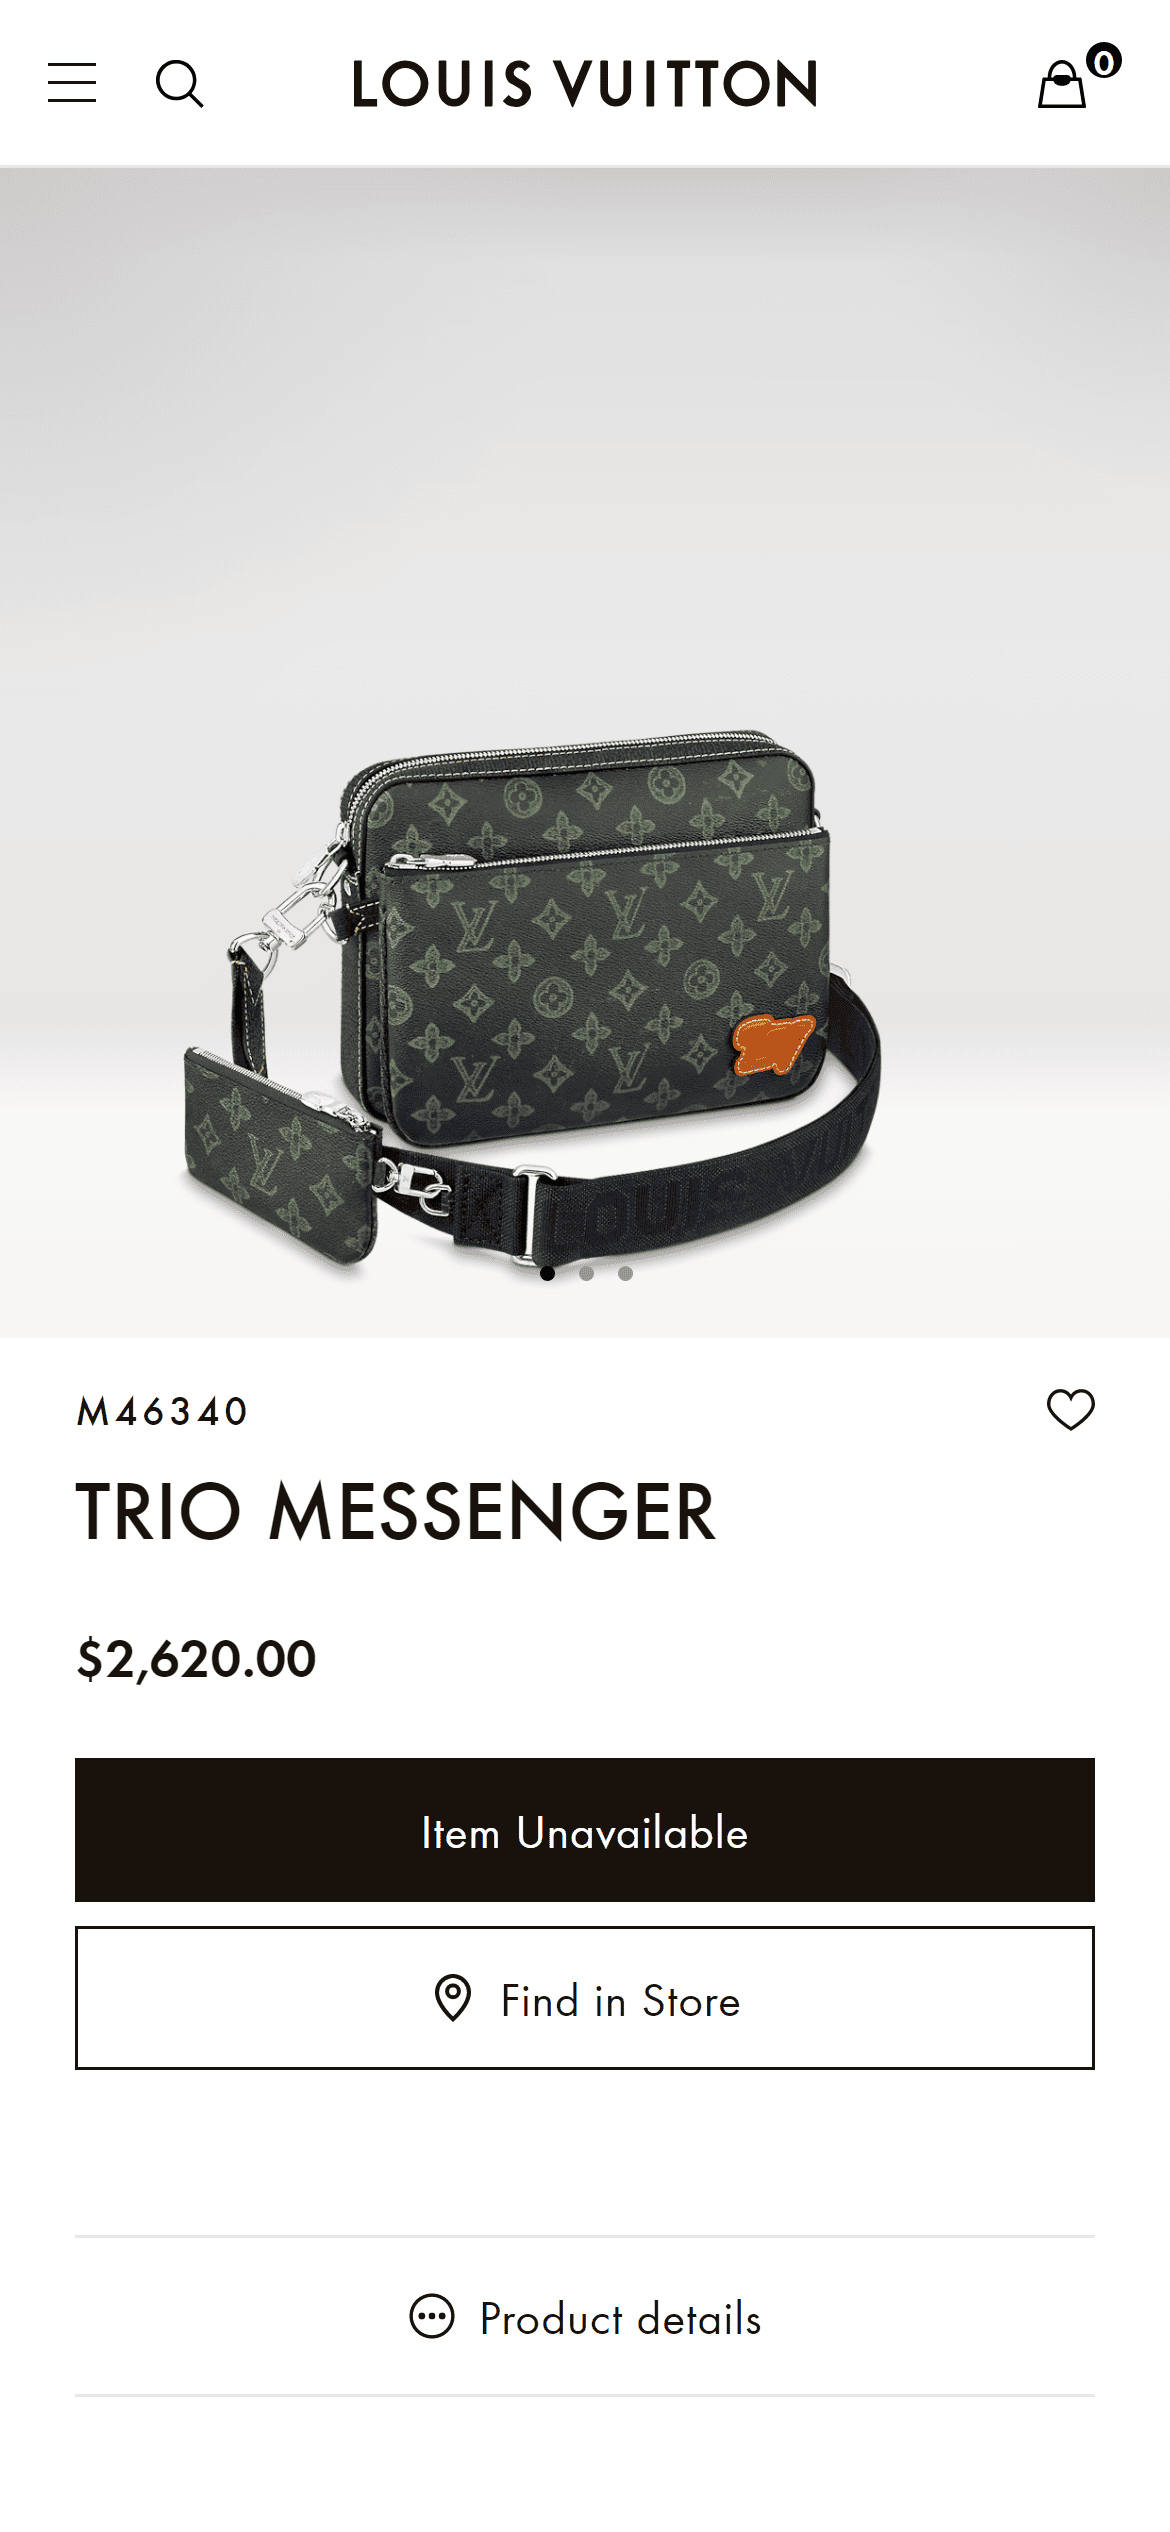 us.louisvuitton.com_eng-us_products_trio-messenger-monogram-other-nvprod3880045v_M46340iPhone-12-Pro.png